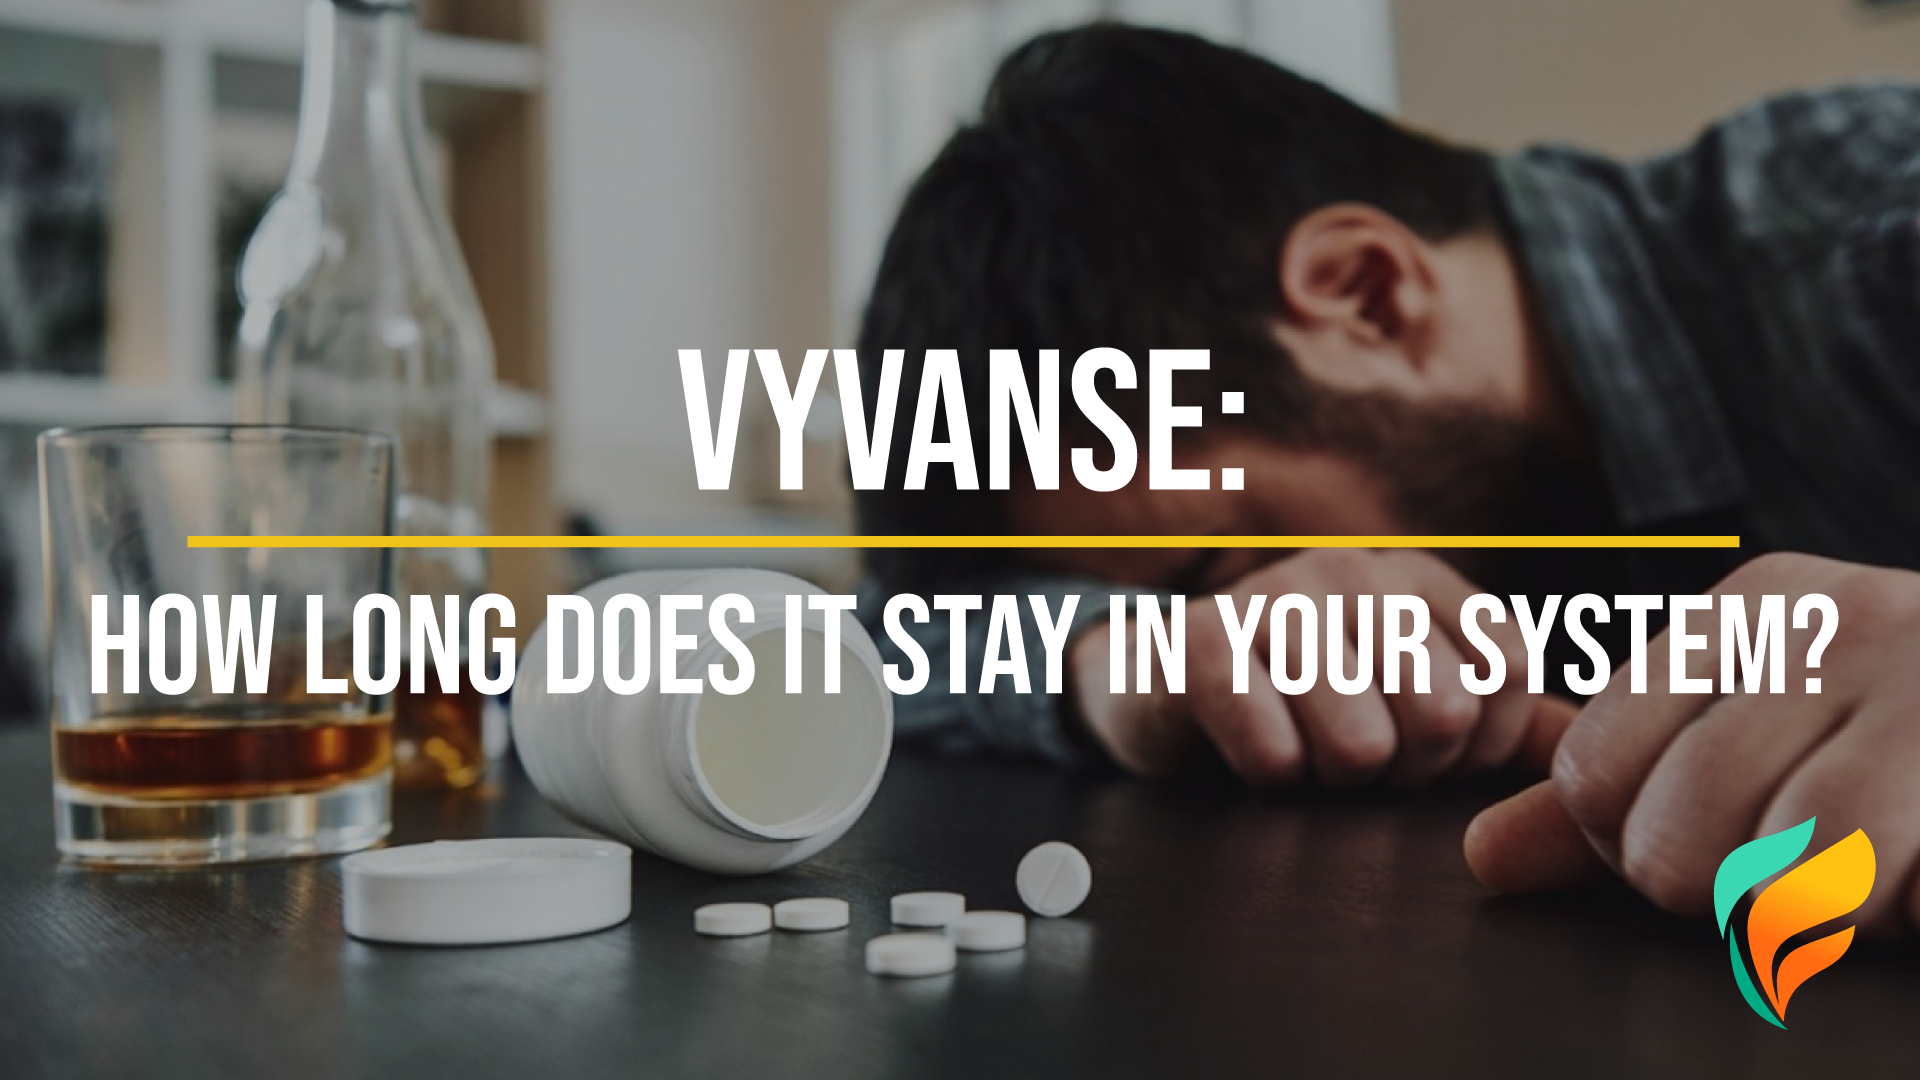 What is the Half-Life of Vyvanse?